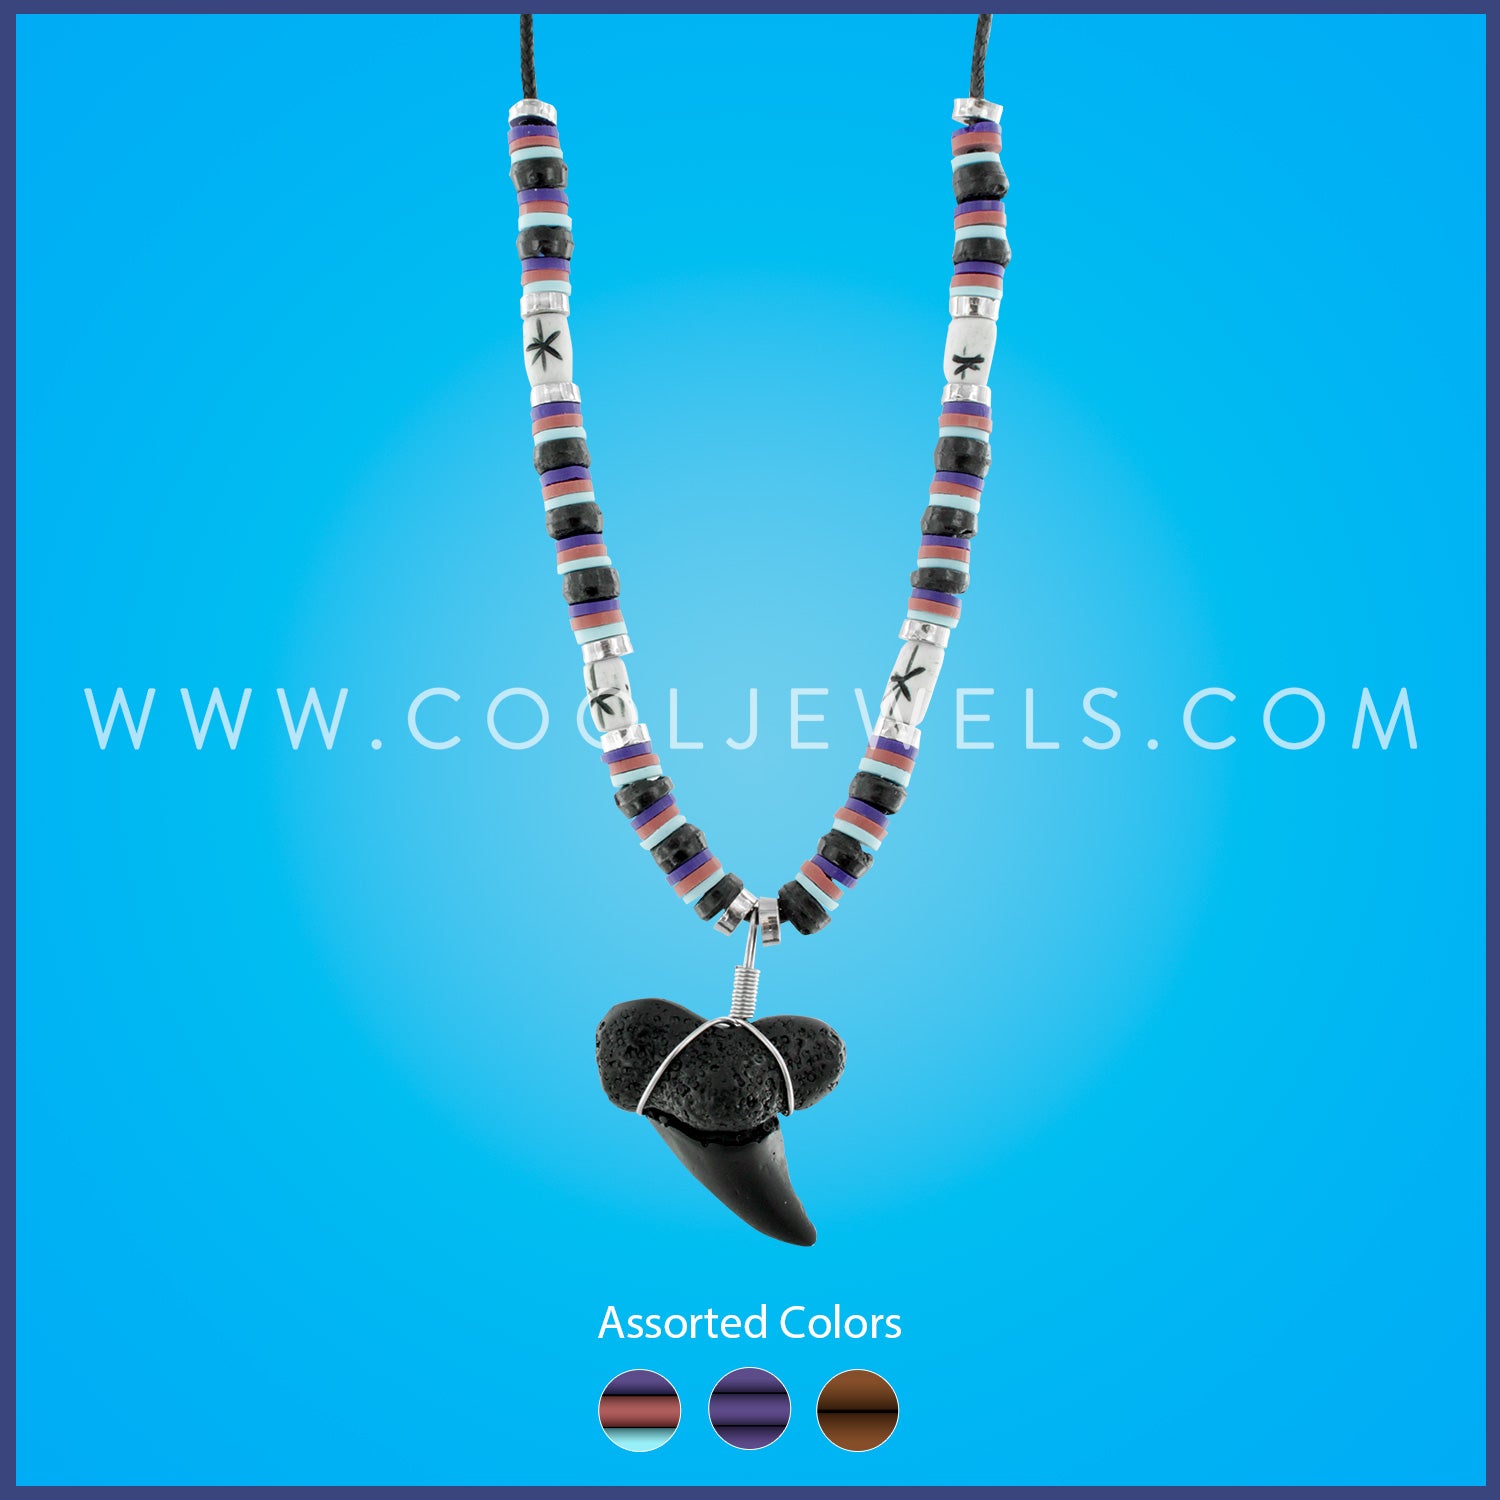 BLACK CORD NECKLACE WITH COCO BEADS, FIMO, & TUBE BEADS WITH IMITATION BLACK SHARK TOOTH PENDANT - ASSORTED COLORS Comes with assorted shark teeth. 